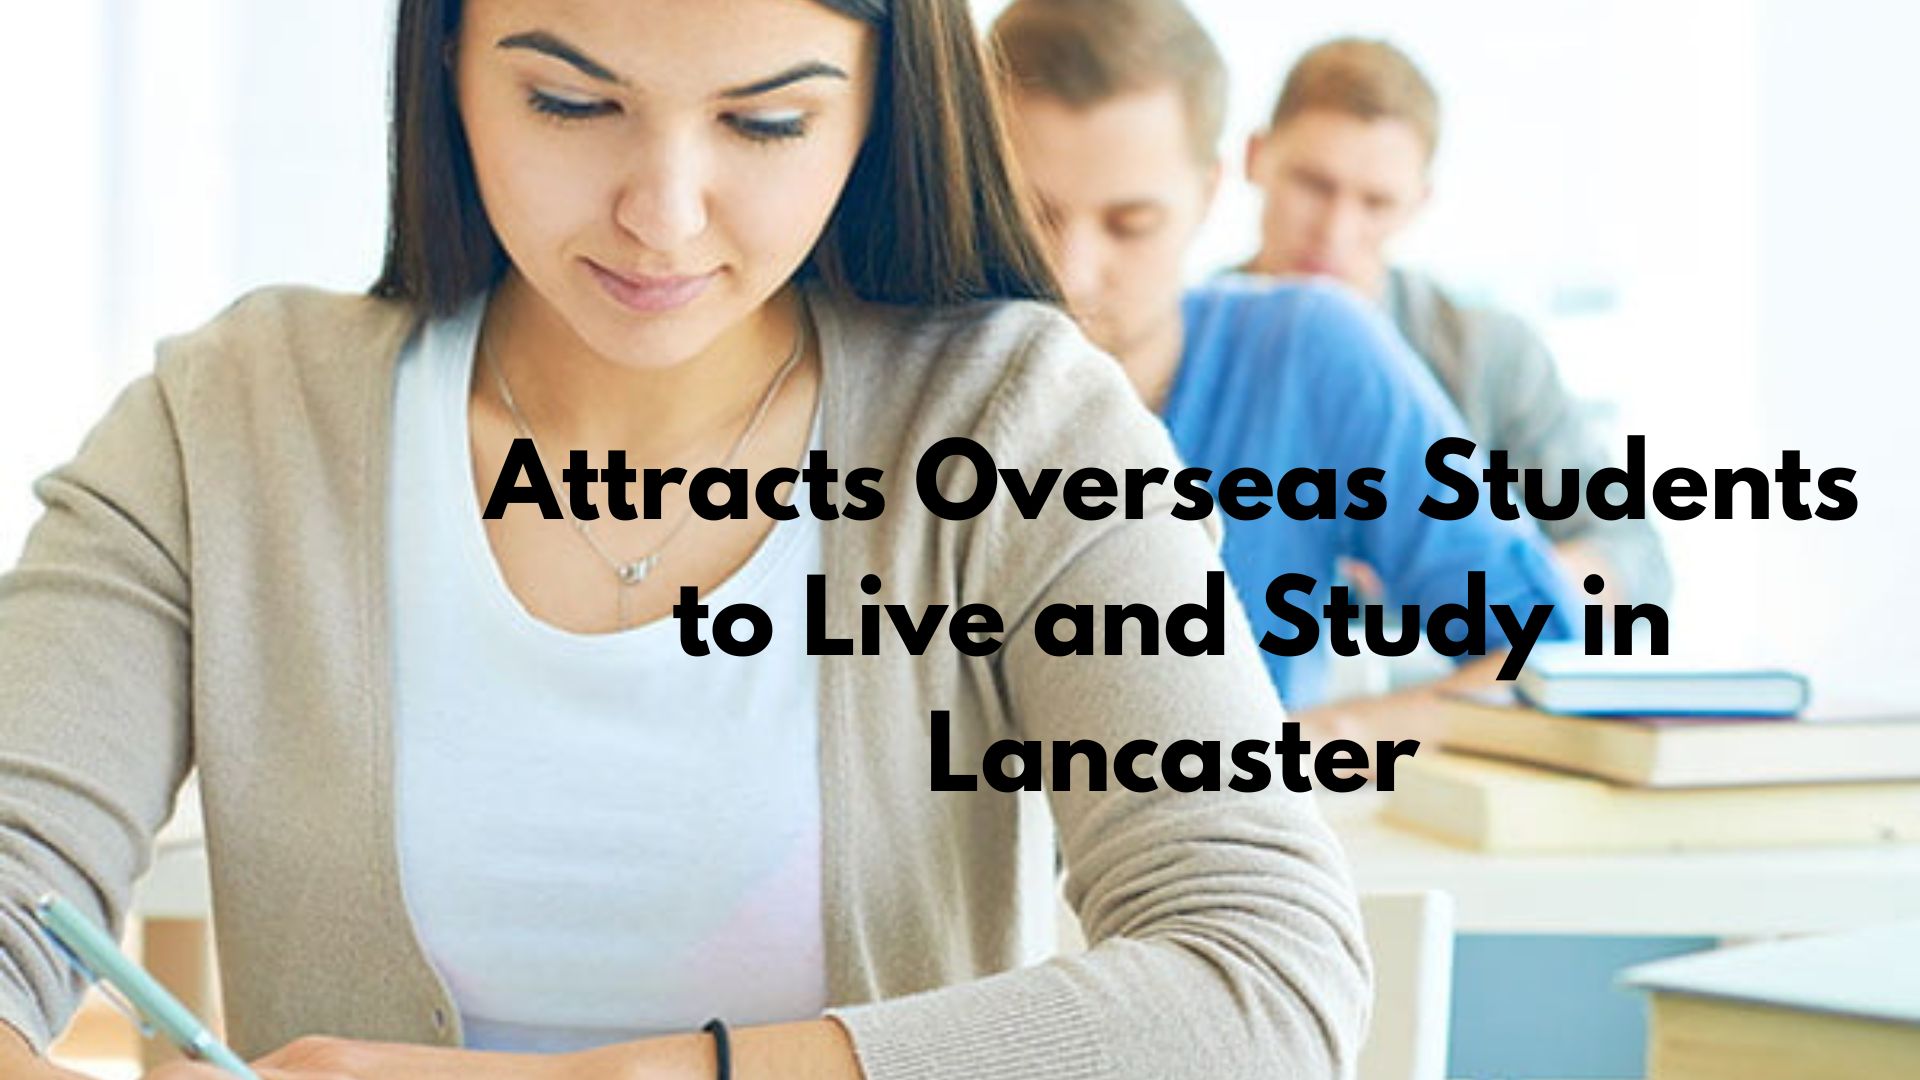 What attracts overseas students to live and study in Lancaster